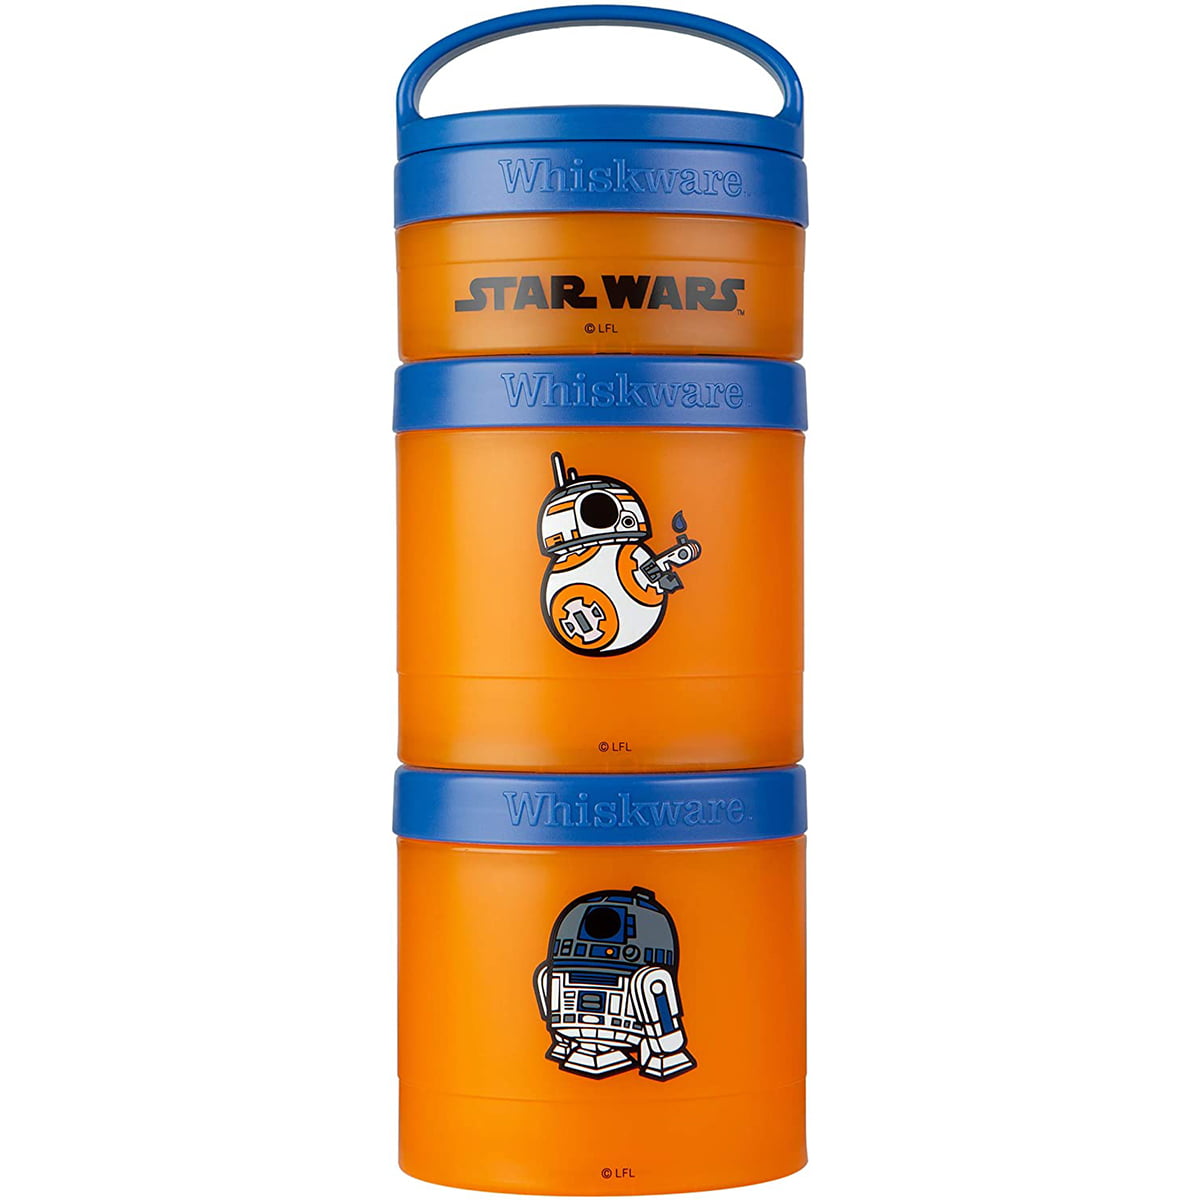 Whiskware Star Wars Stackable Snack Containers Set of 2 Stacks